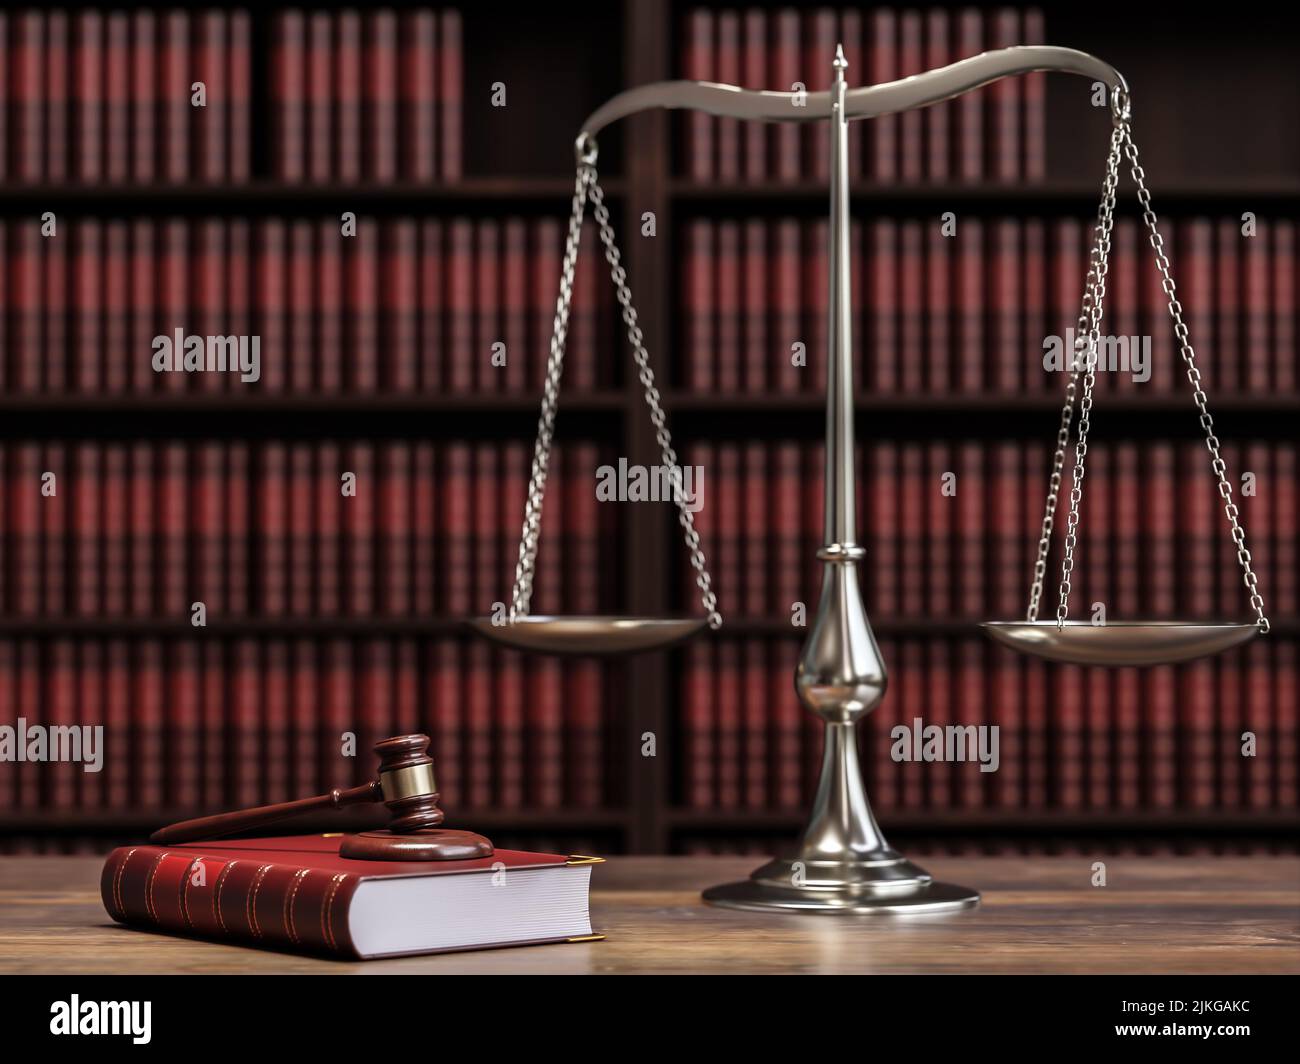 3d rendering of gavel placed on code of justice book, scales placed on wooden table against bookcase full of legal books Stock Photo